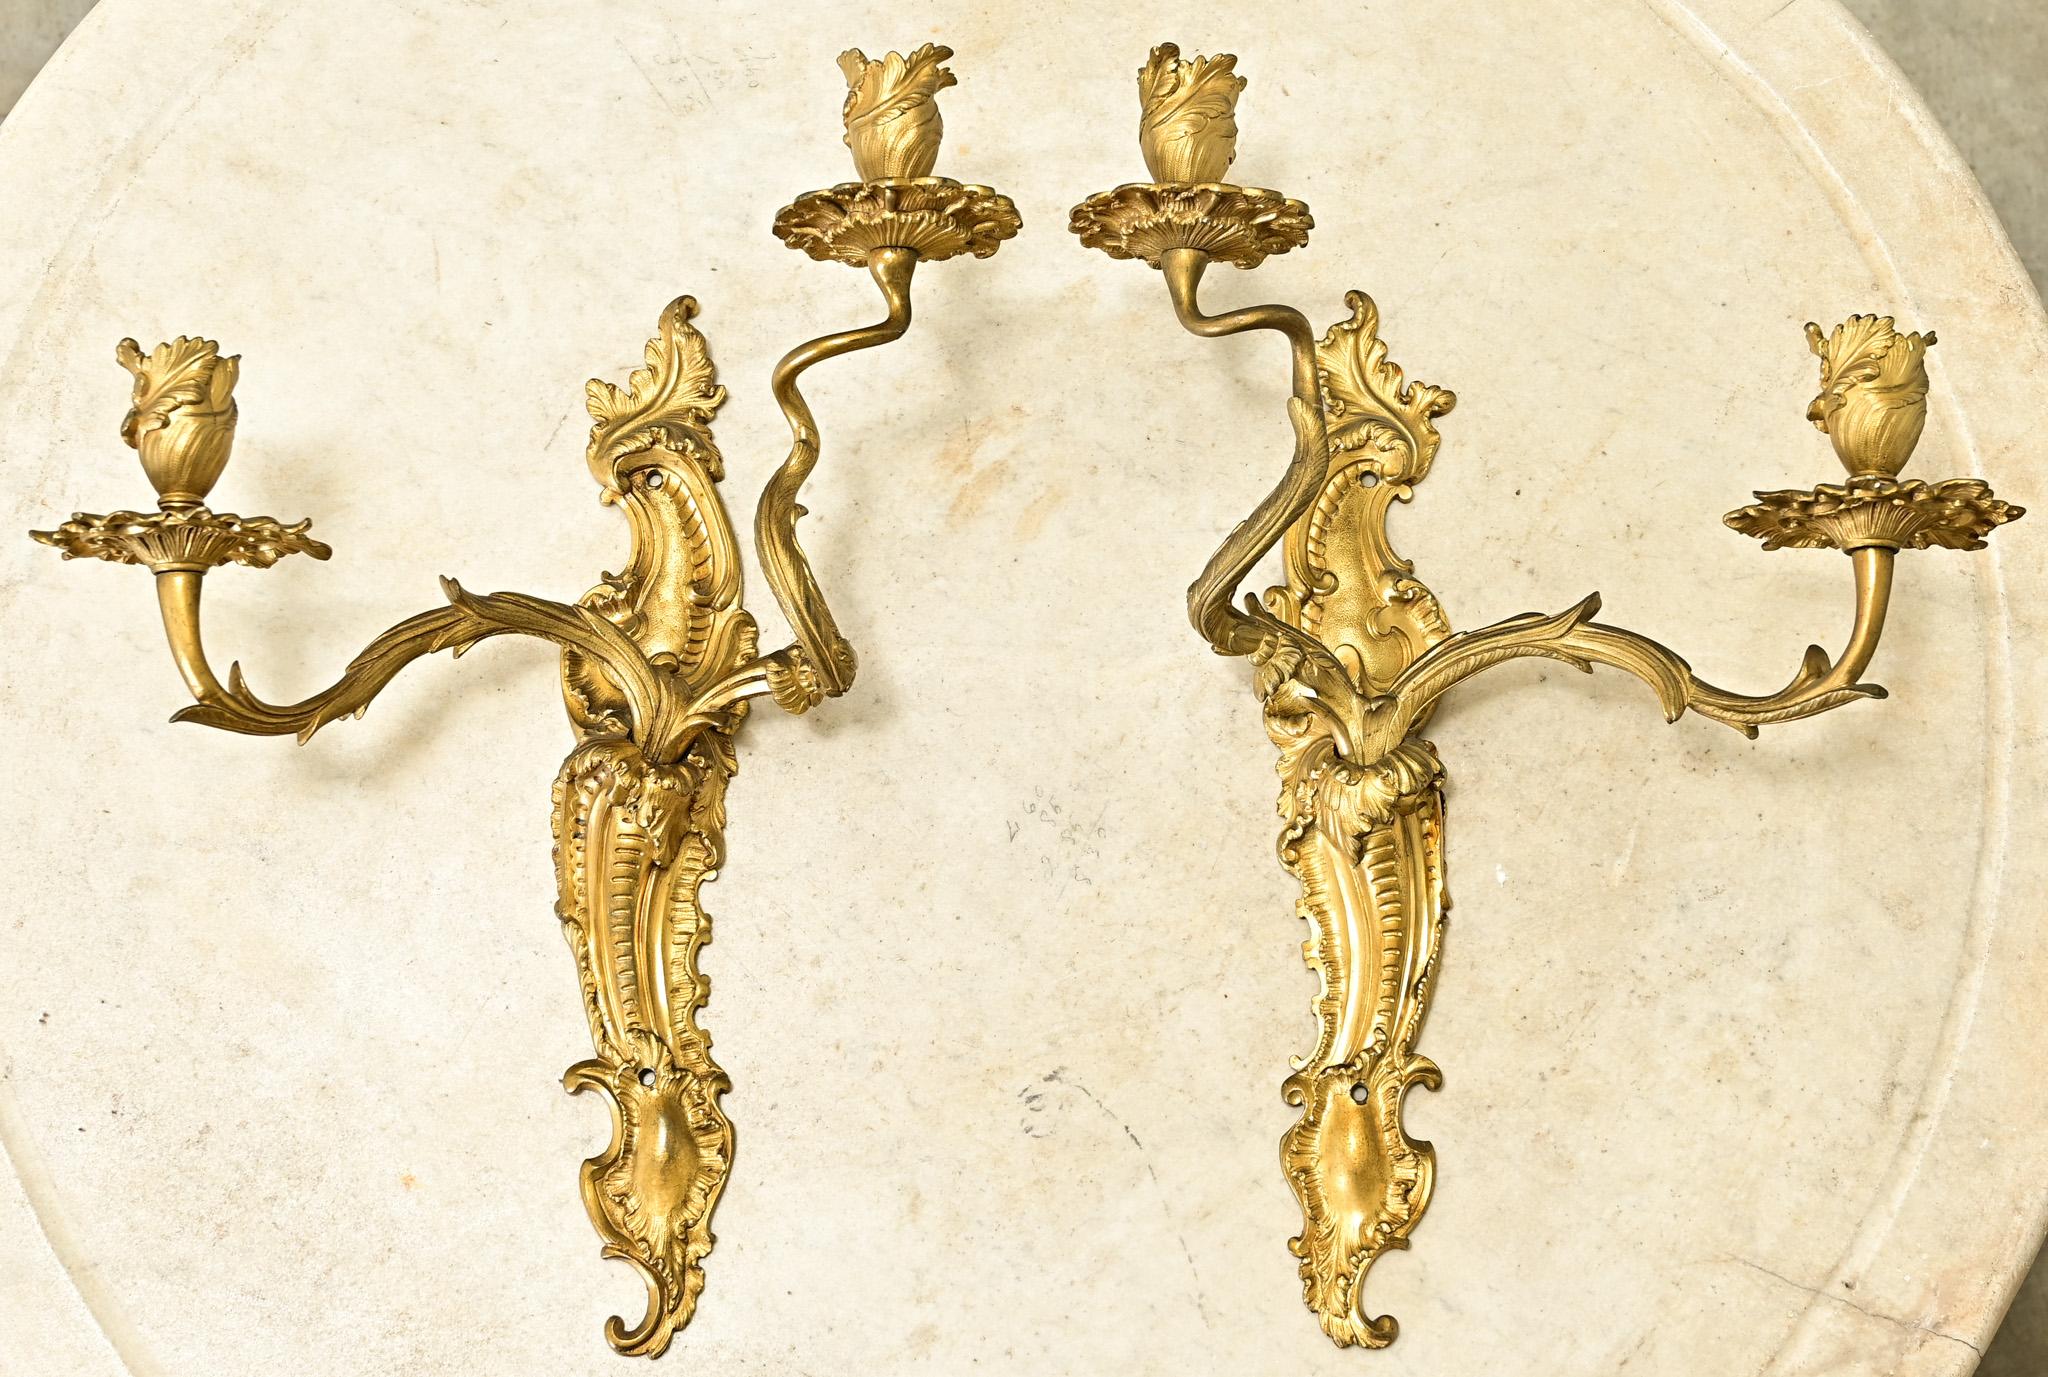 An elegant pair of French Louis XV period brass sconces. This stunning pair of non wired sconces are made of solid brass. The stylized backplate has all the classic Rococo patterns found in the Louis XV style. Twisting and vine-like arms end with